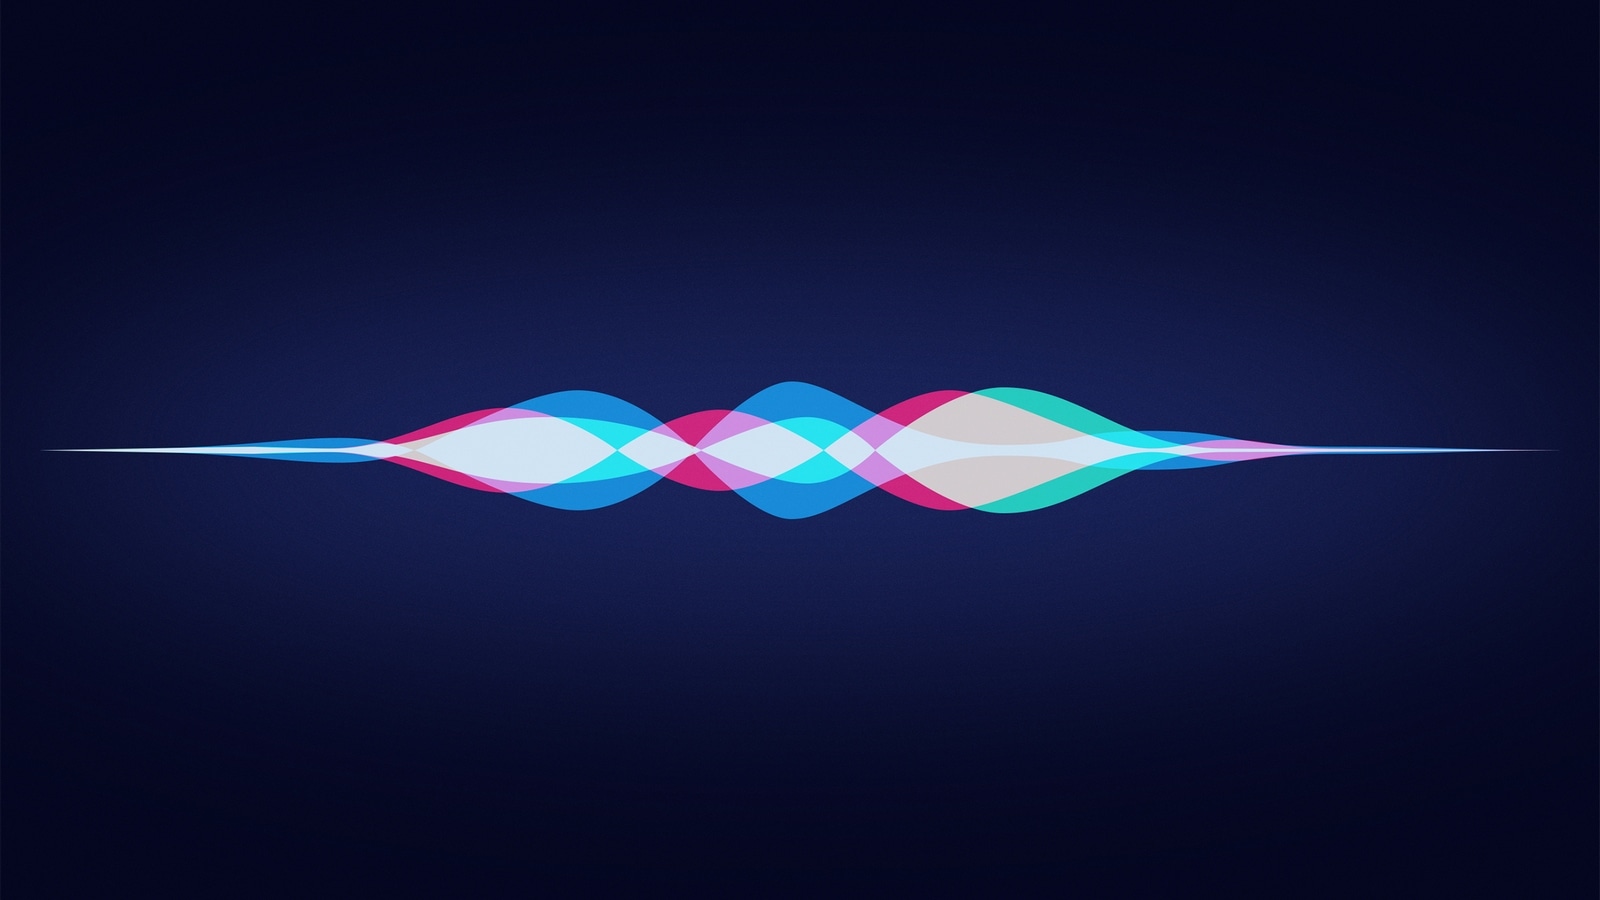 Siri is a major focus of Apple's Seattle expansion